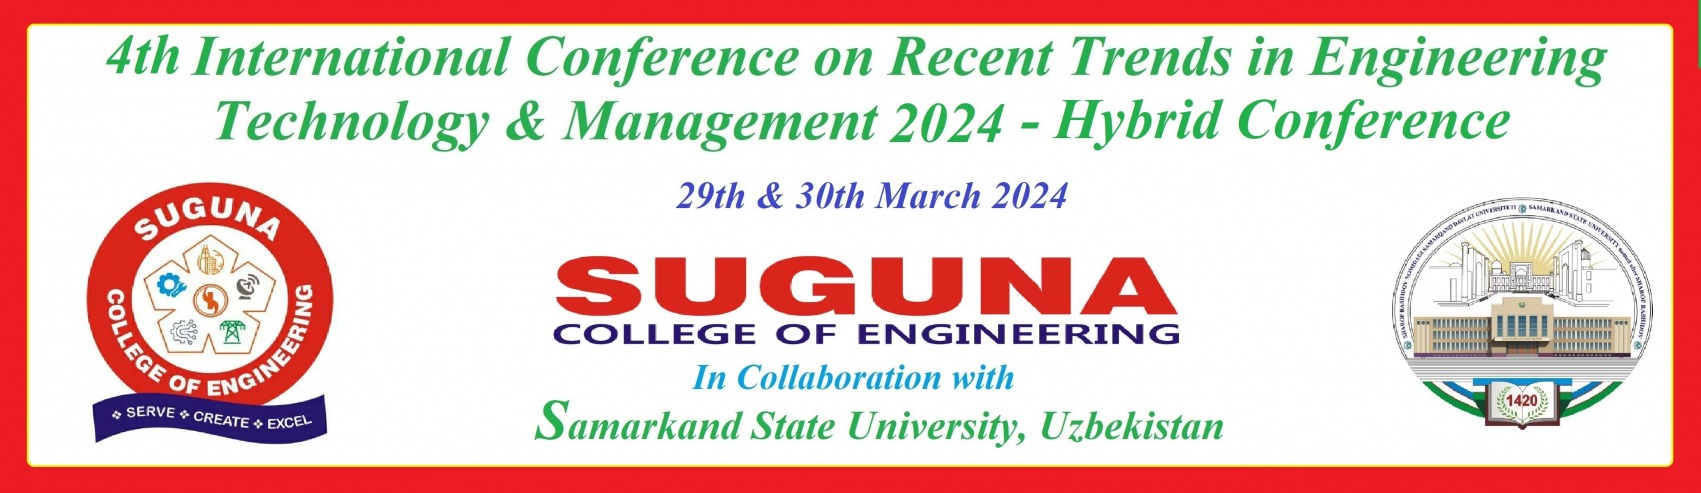 ICRETM 2024, INTERNATIONAL CONFERENCE ON RECENT TRENDS IN ENGINEERING TECHNOLOGY AND MANAGEMENT